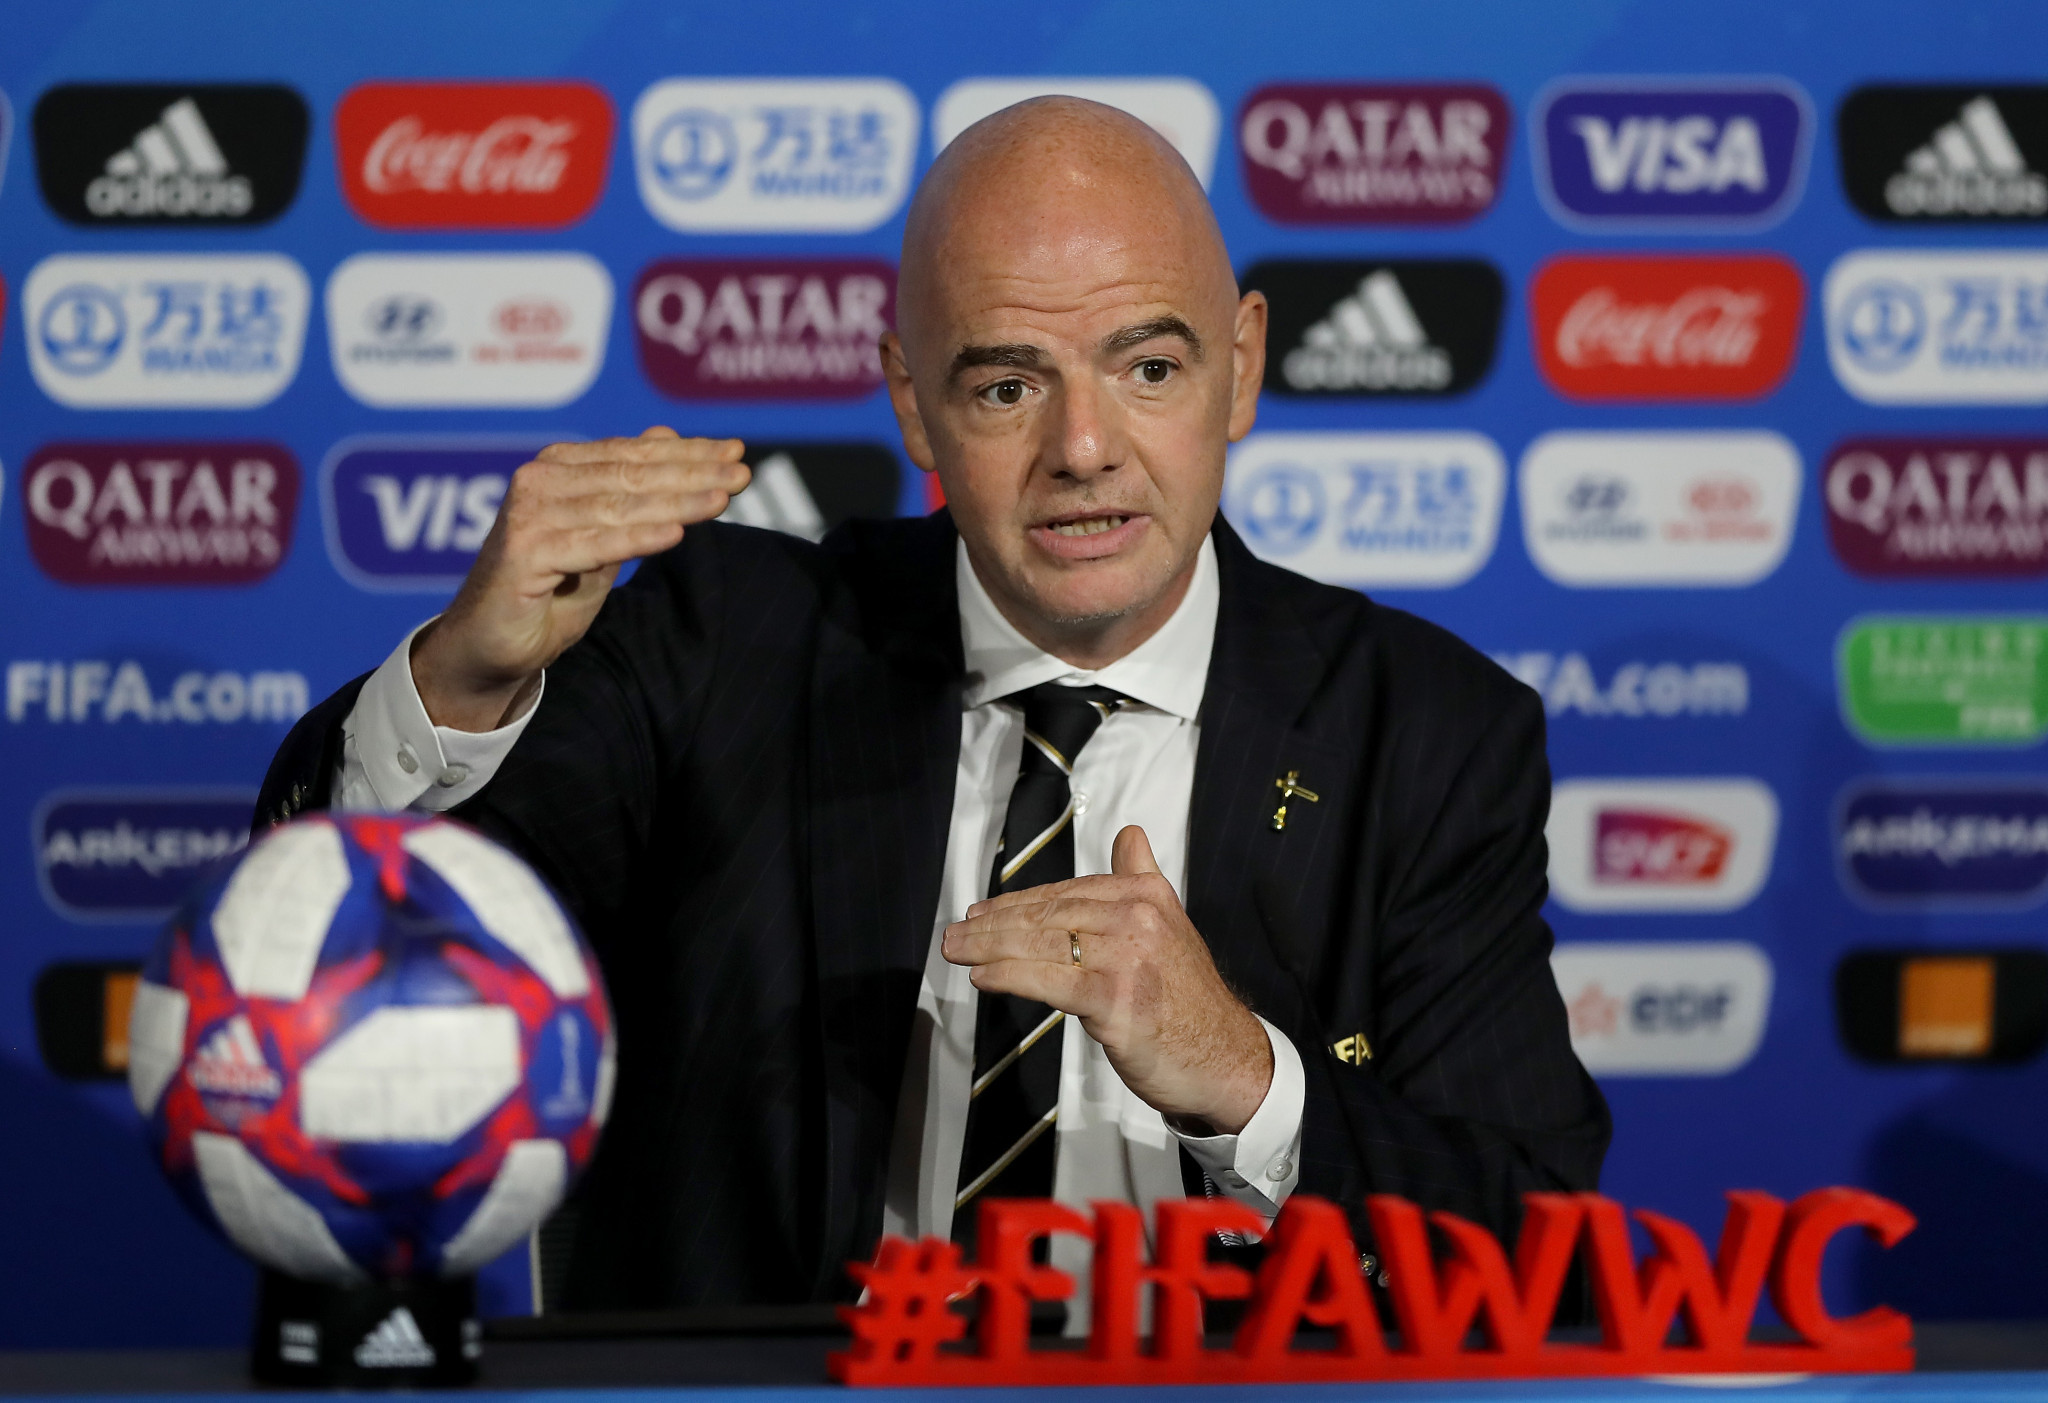 FIFA World Cup hosts "taking real steps" to improve workers' welfare, Infantino claims